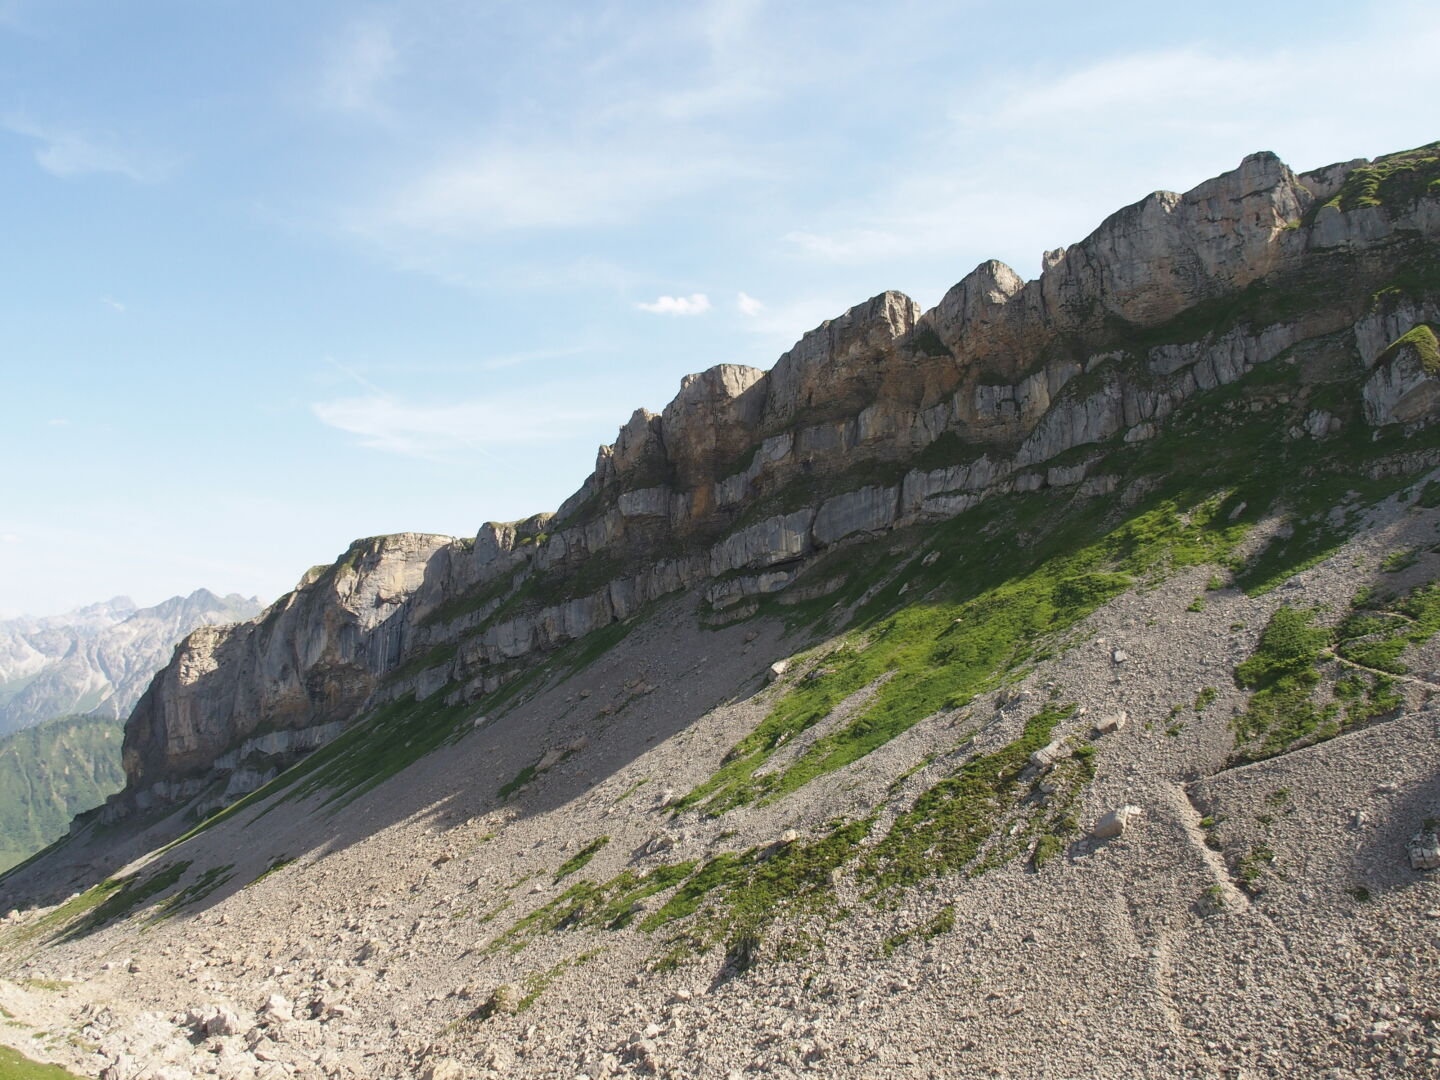 Side view of the plateau of the Hoher Ifen.